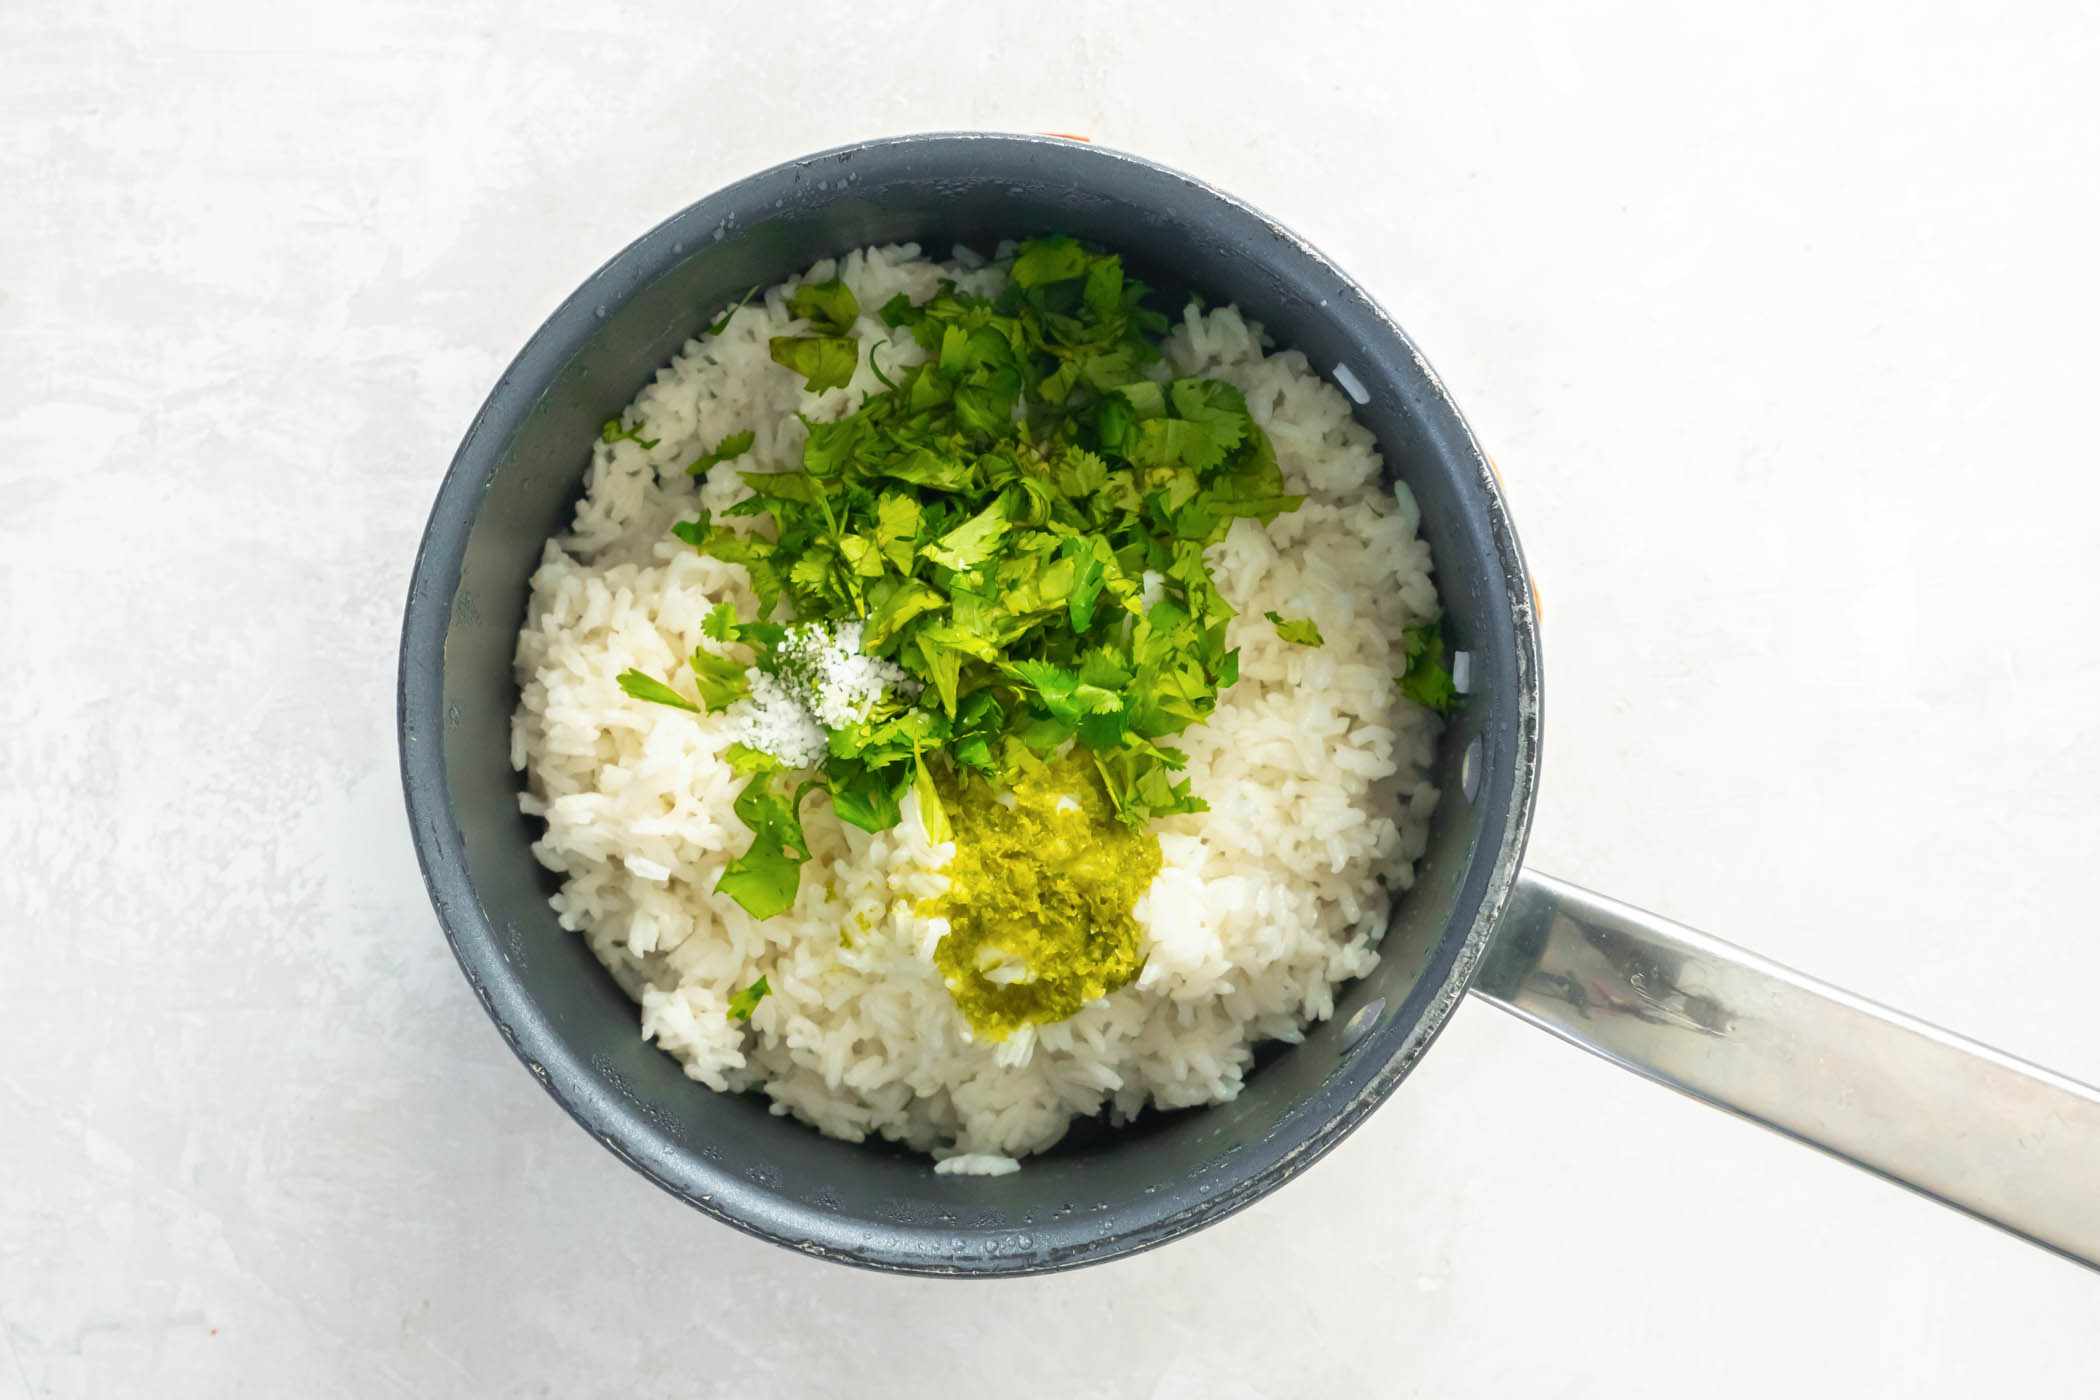 Chopped cilantro, lime zest, lime juice and salt added to cooked rice in pan.